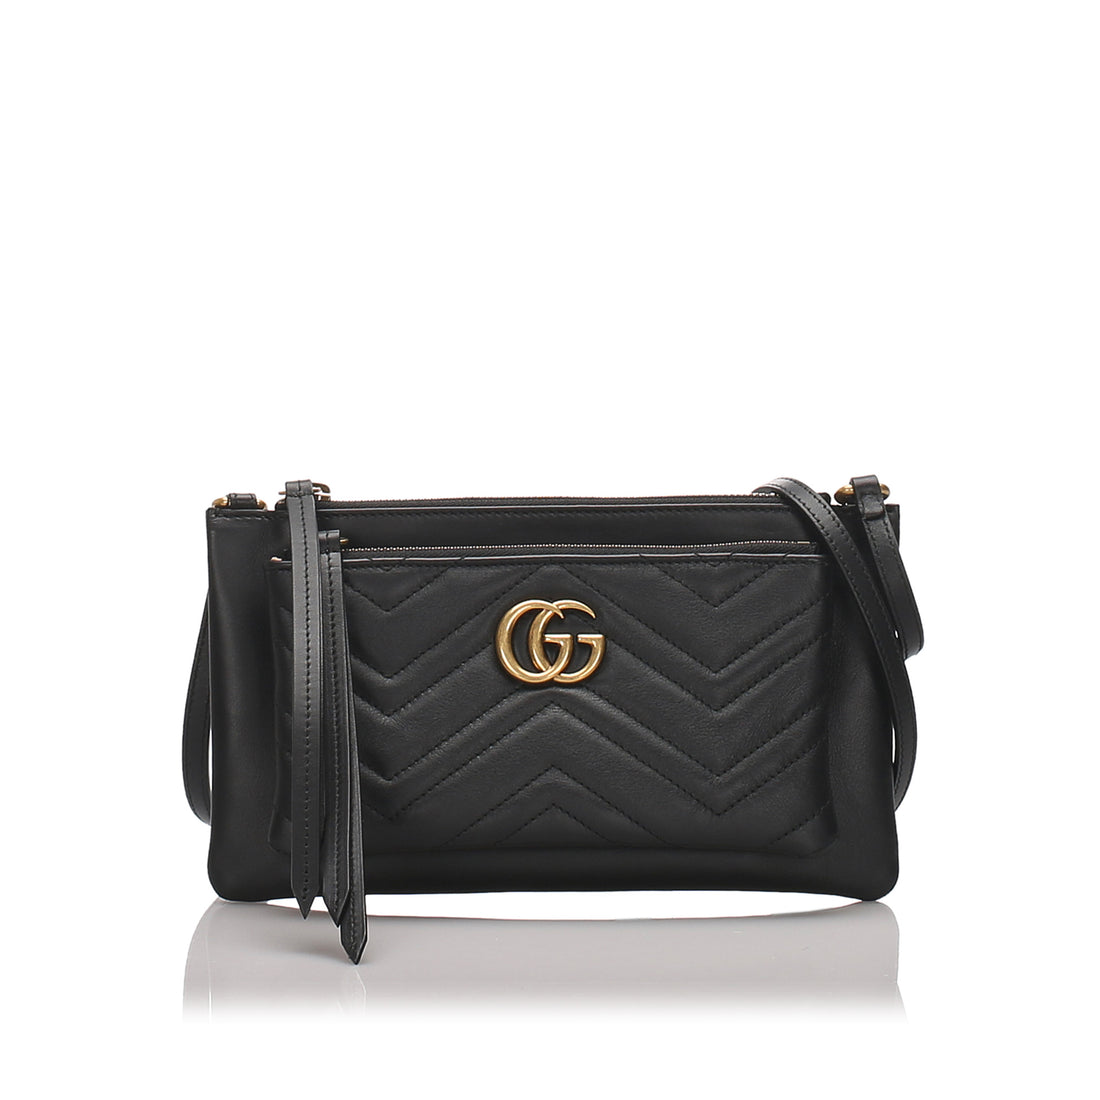 Gucci Black Leather Marmont GG Small Crossbody Bag – I MISS YOU VINTAGE